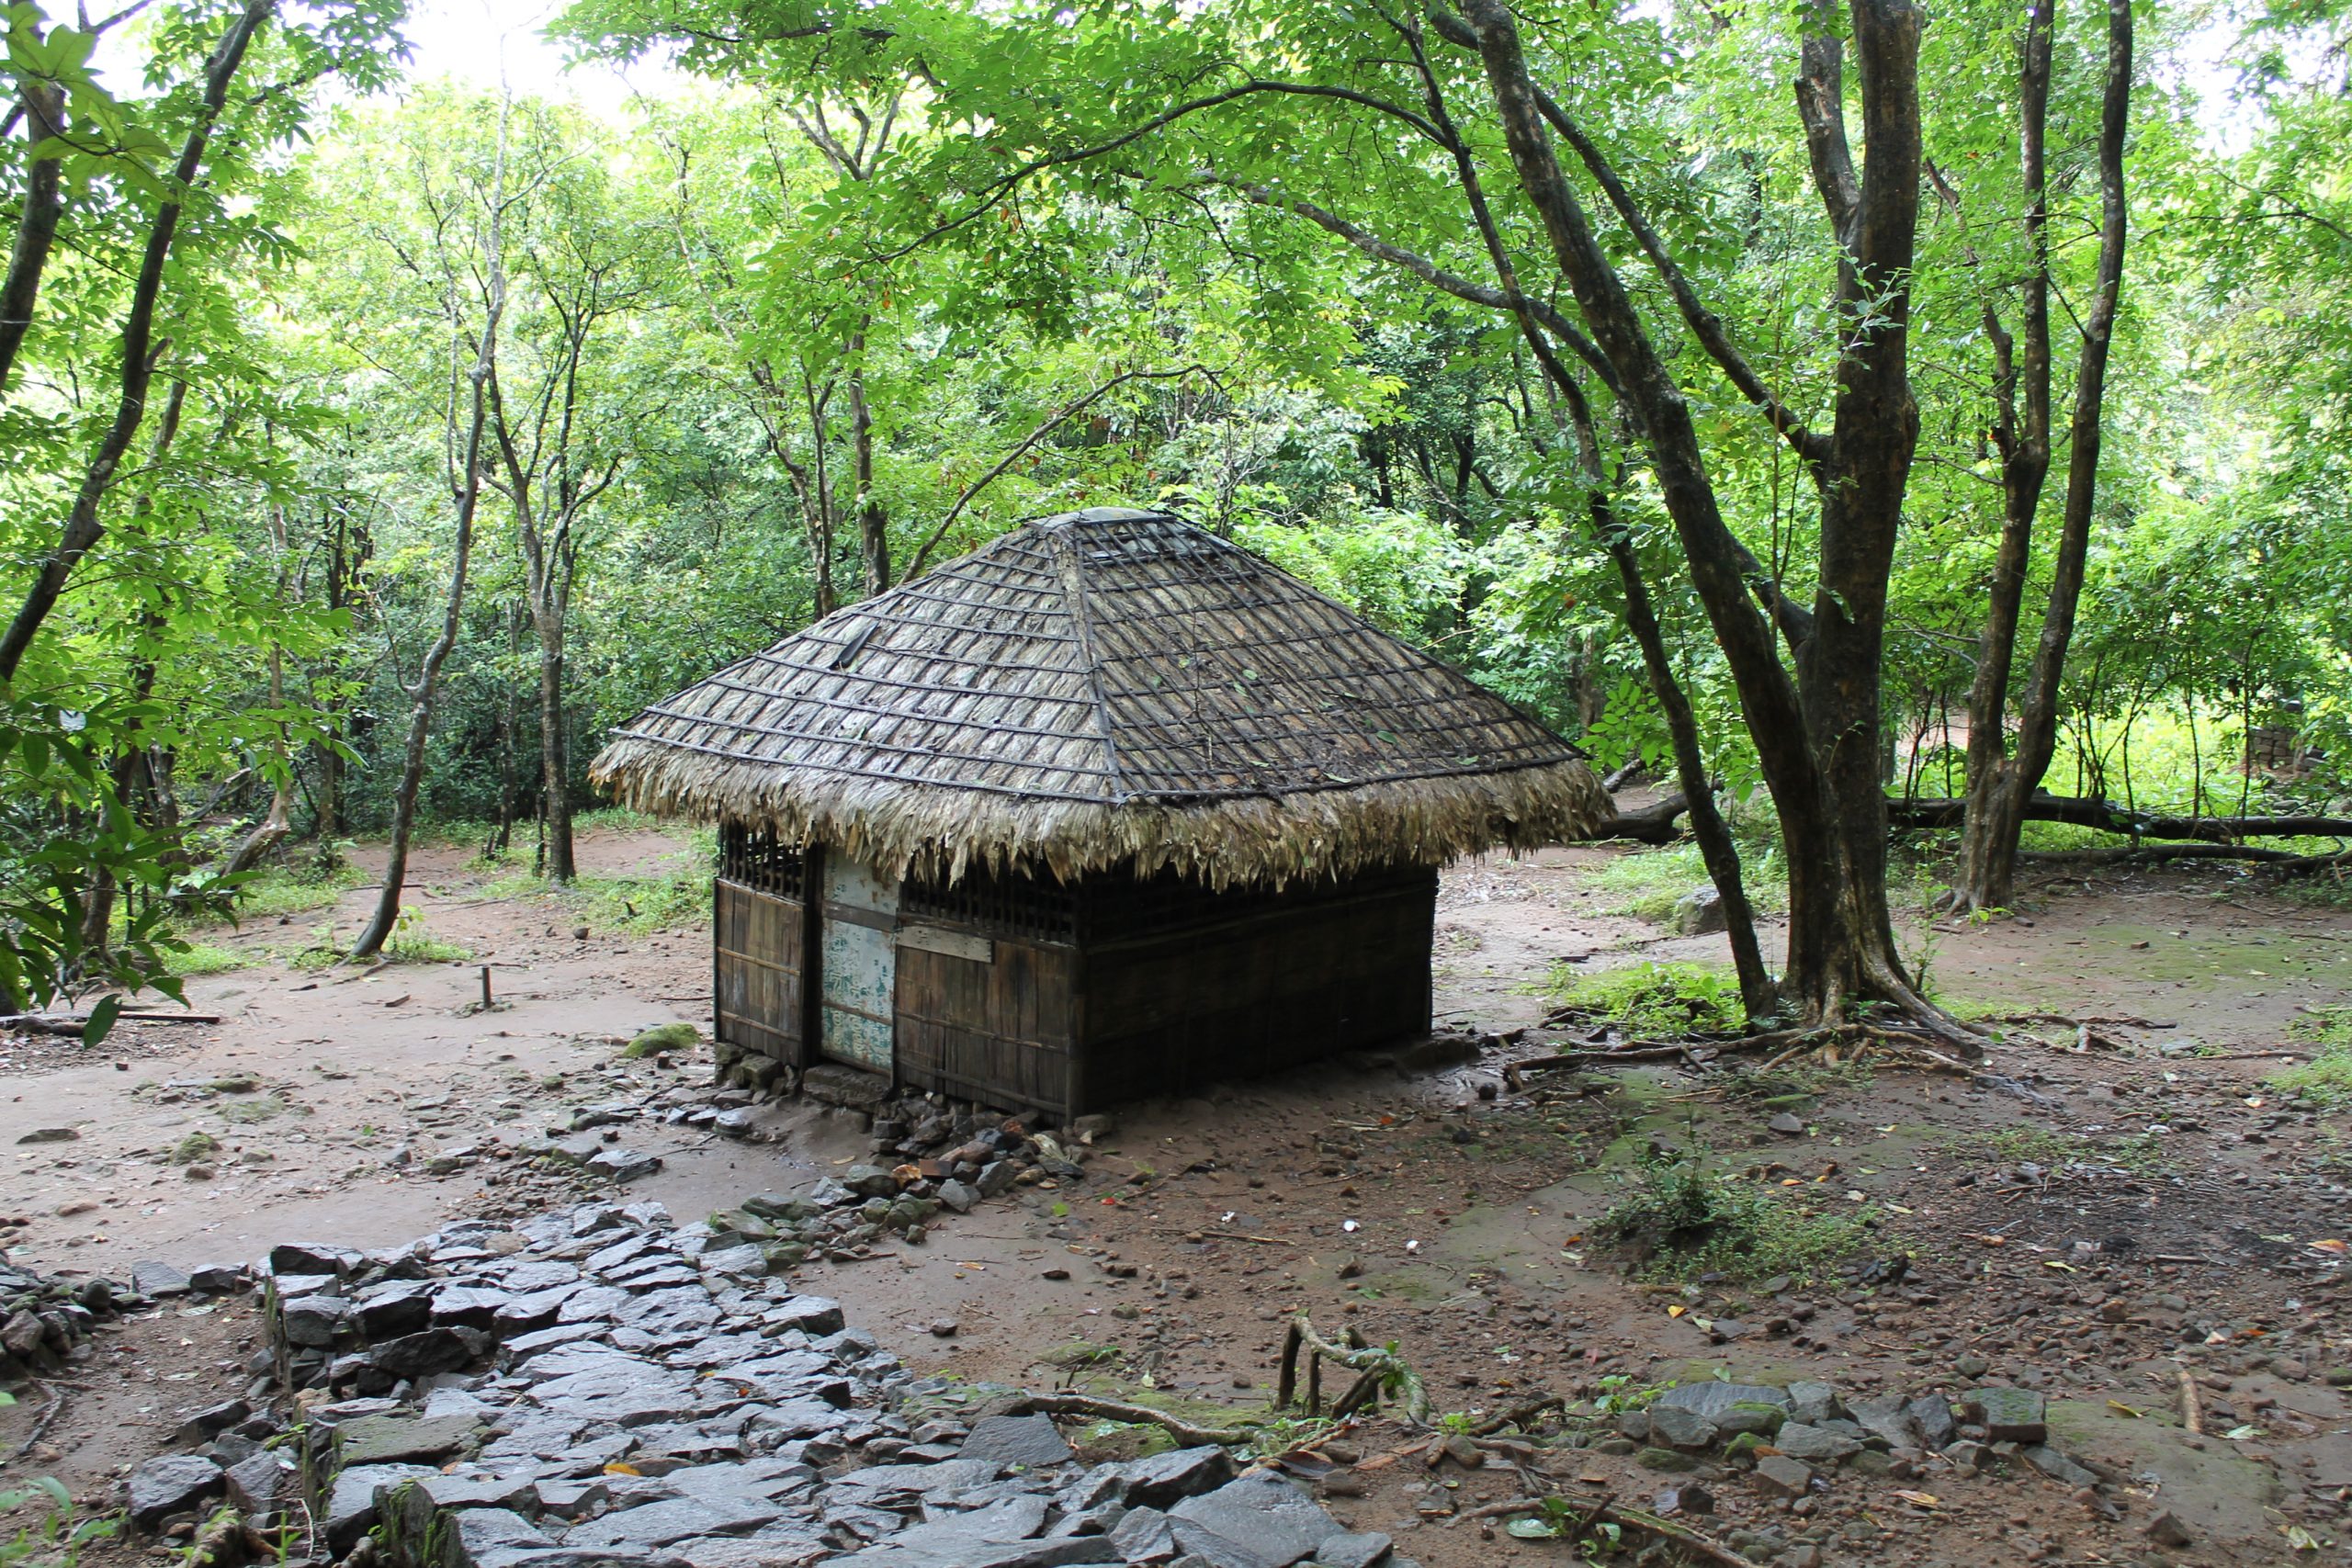 Hut in forest